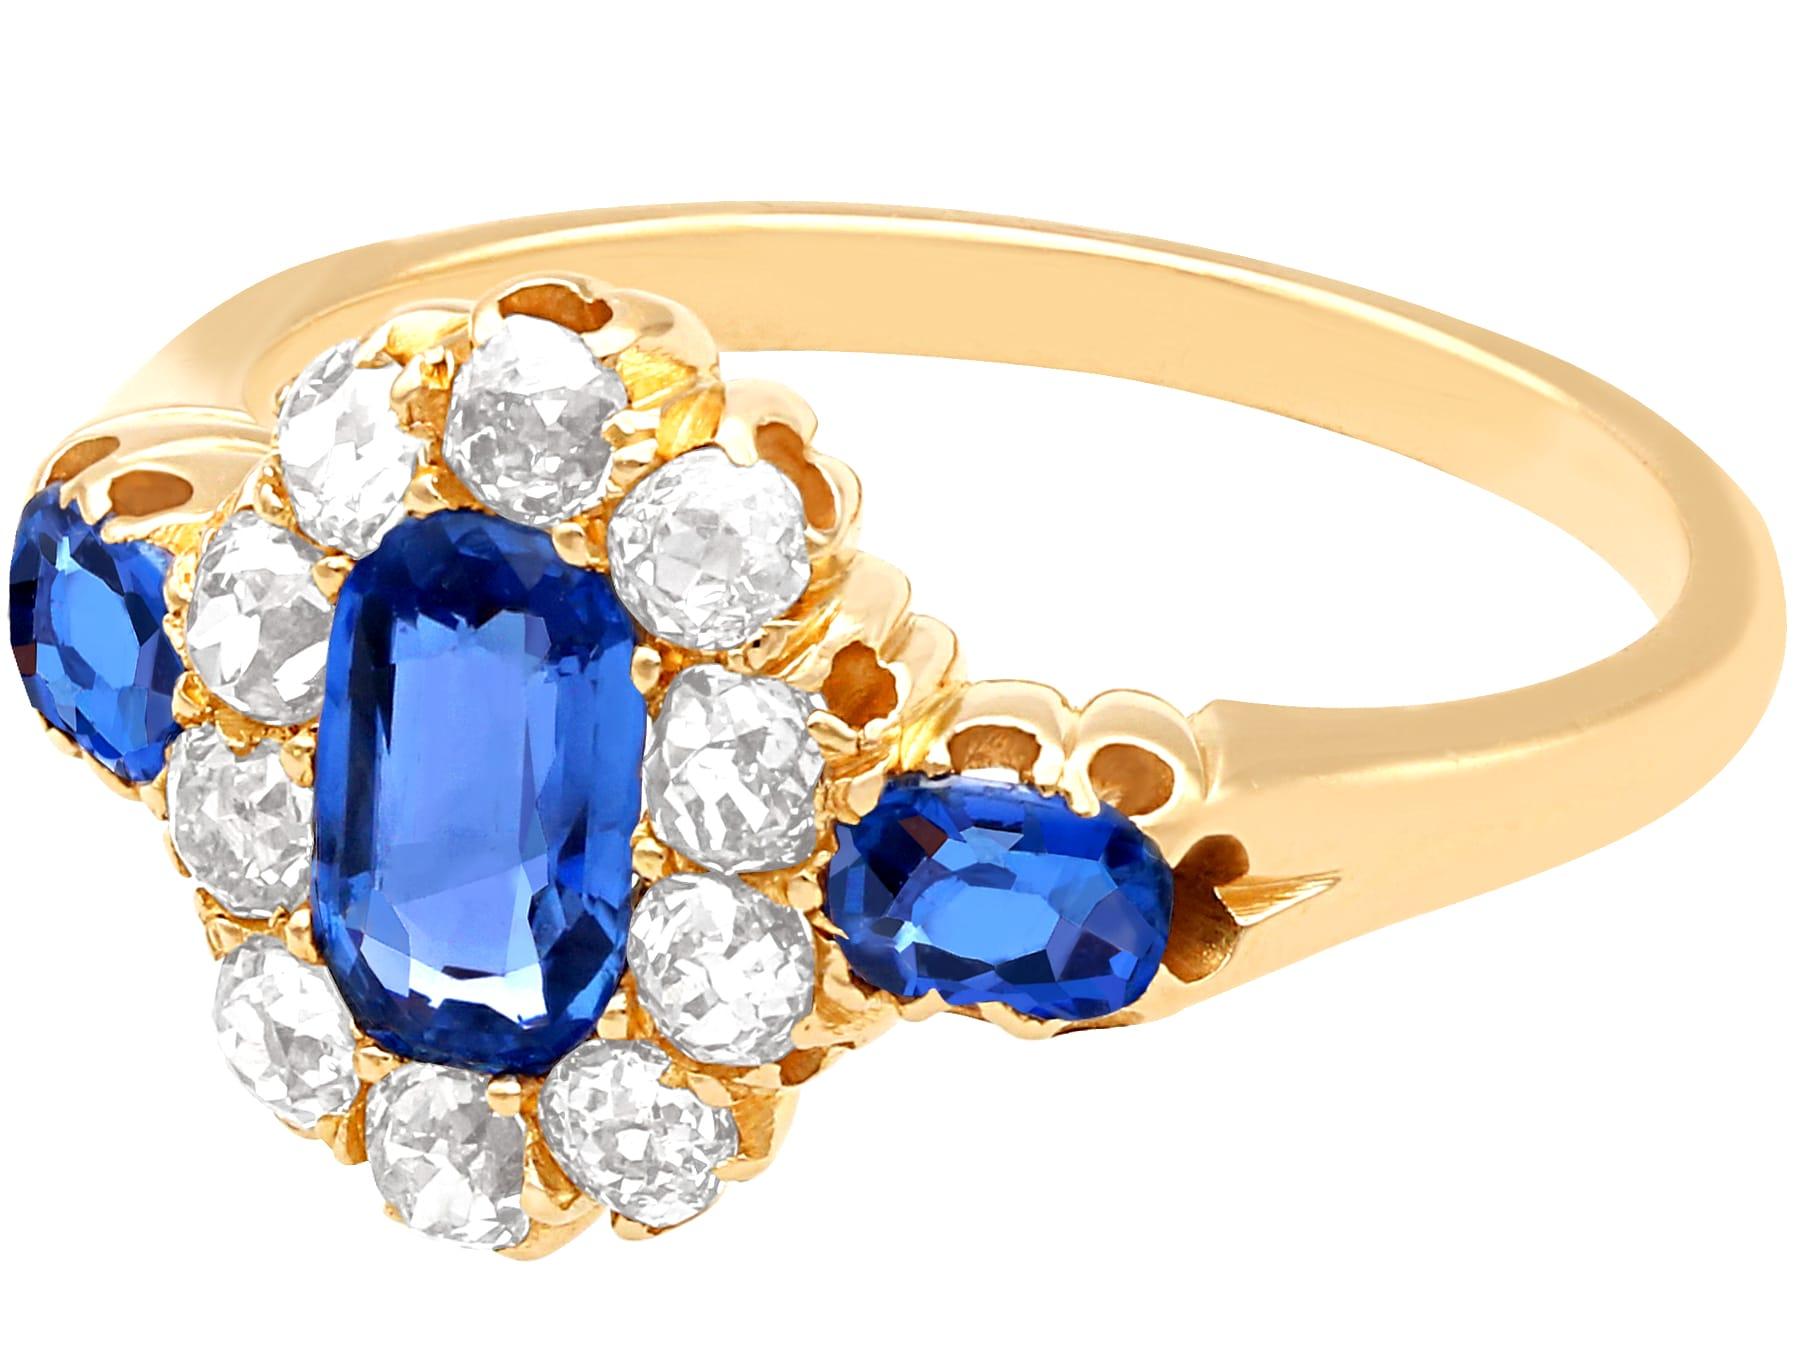 A stunning antique 1.10 carat sapphire and 0.60 carat diamond, 18 karat yellow gold cocktail ring; part of our diverse antique jewelry and estate jewelry collections.

This stunning, fine and impressive oval cut sapphire and diamond cocktail ring